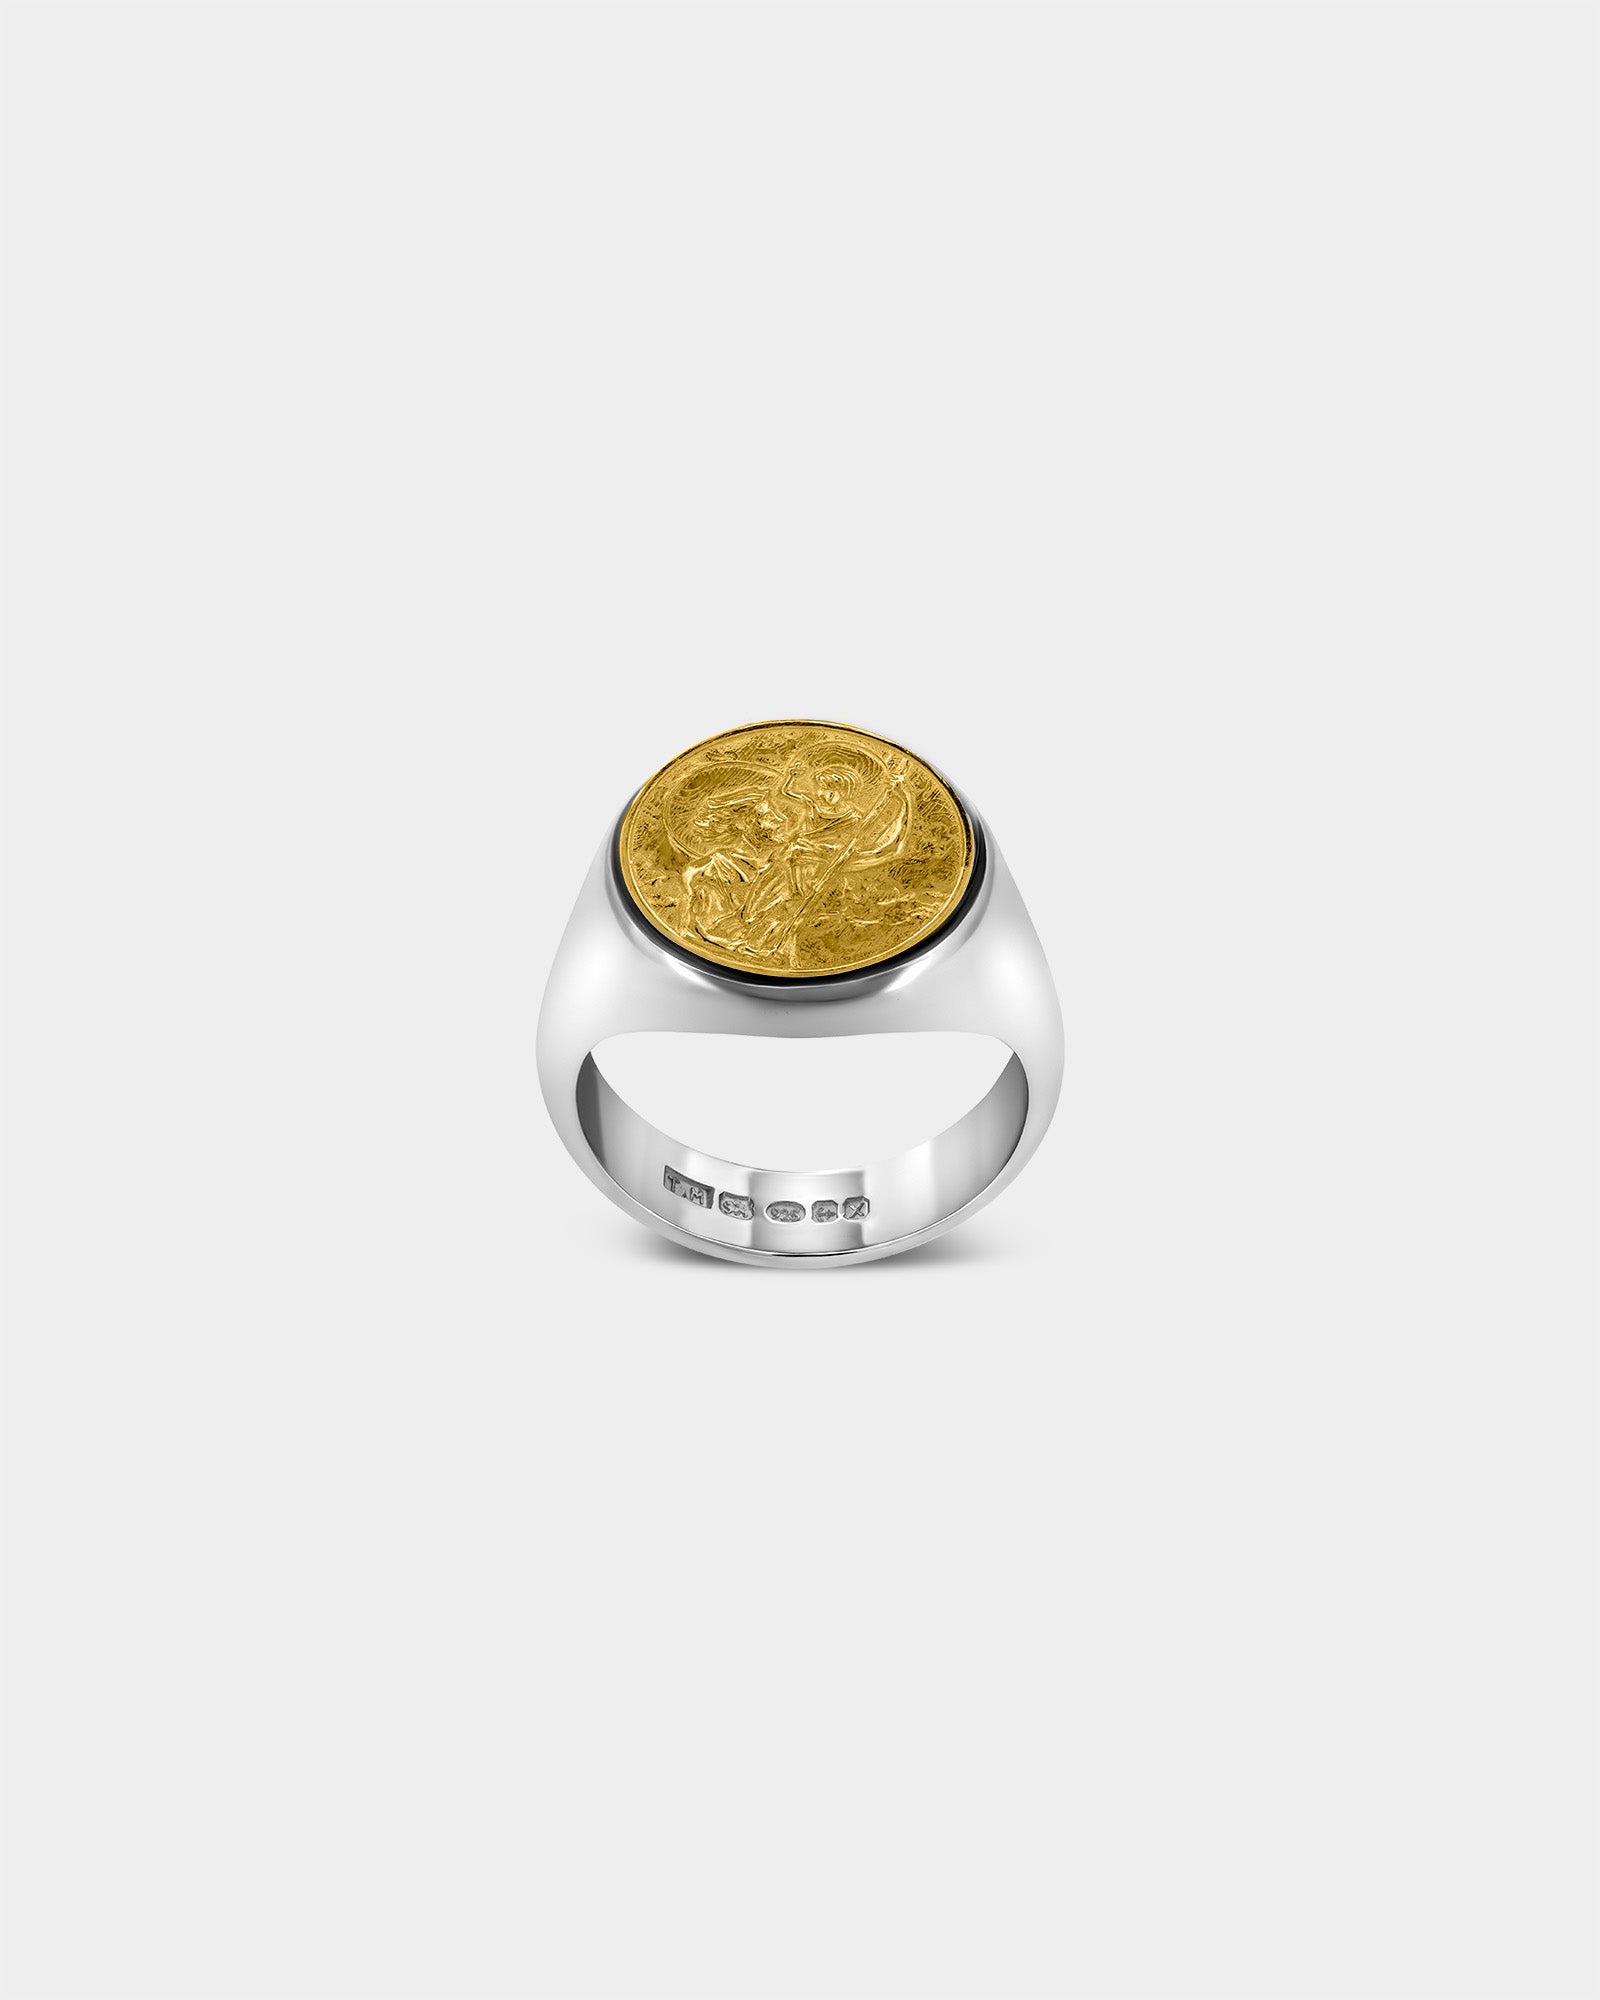 Large Saint Christopher Signet Ring in Sterling Silver / 9k Yellow Gold by Wilson Grant